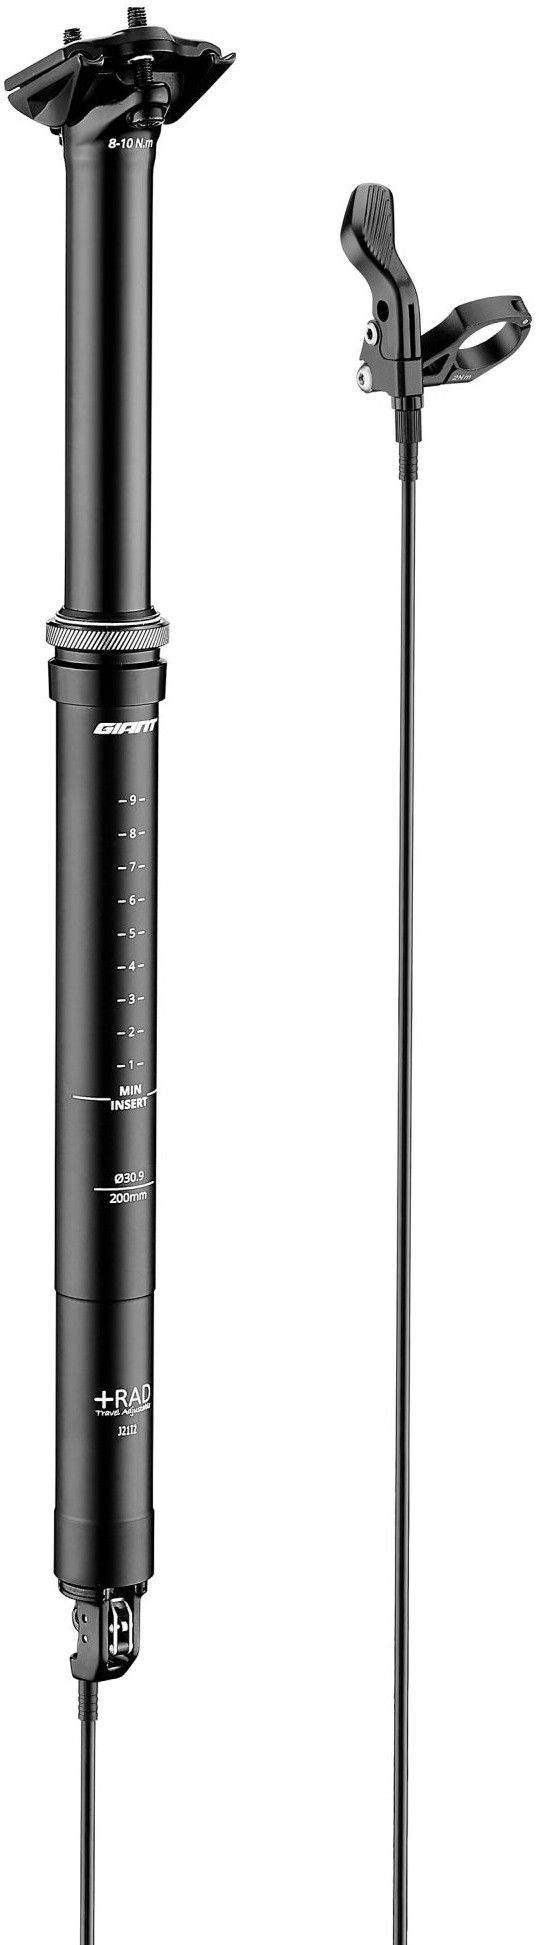 Contact SL Switch 150 Travel Seatpost image 1